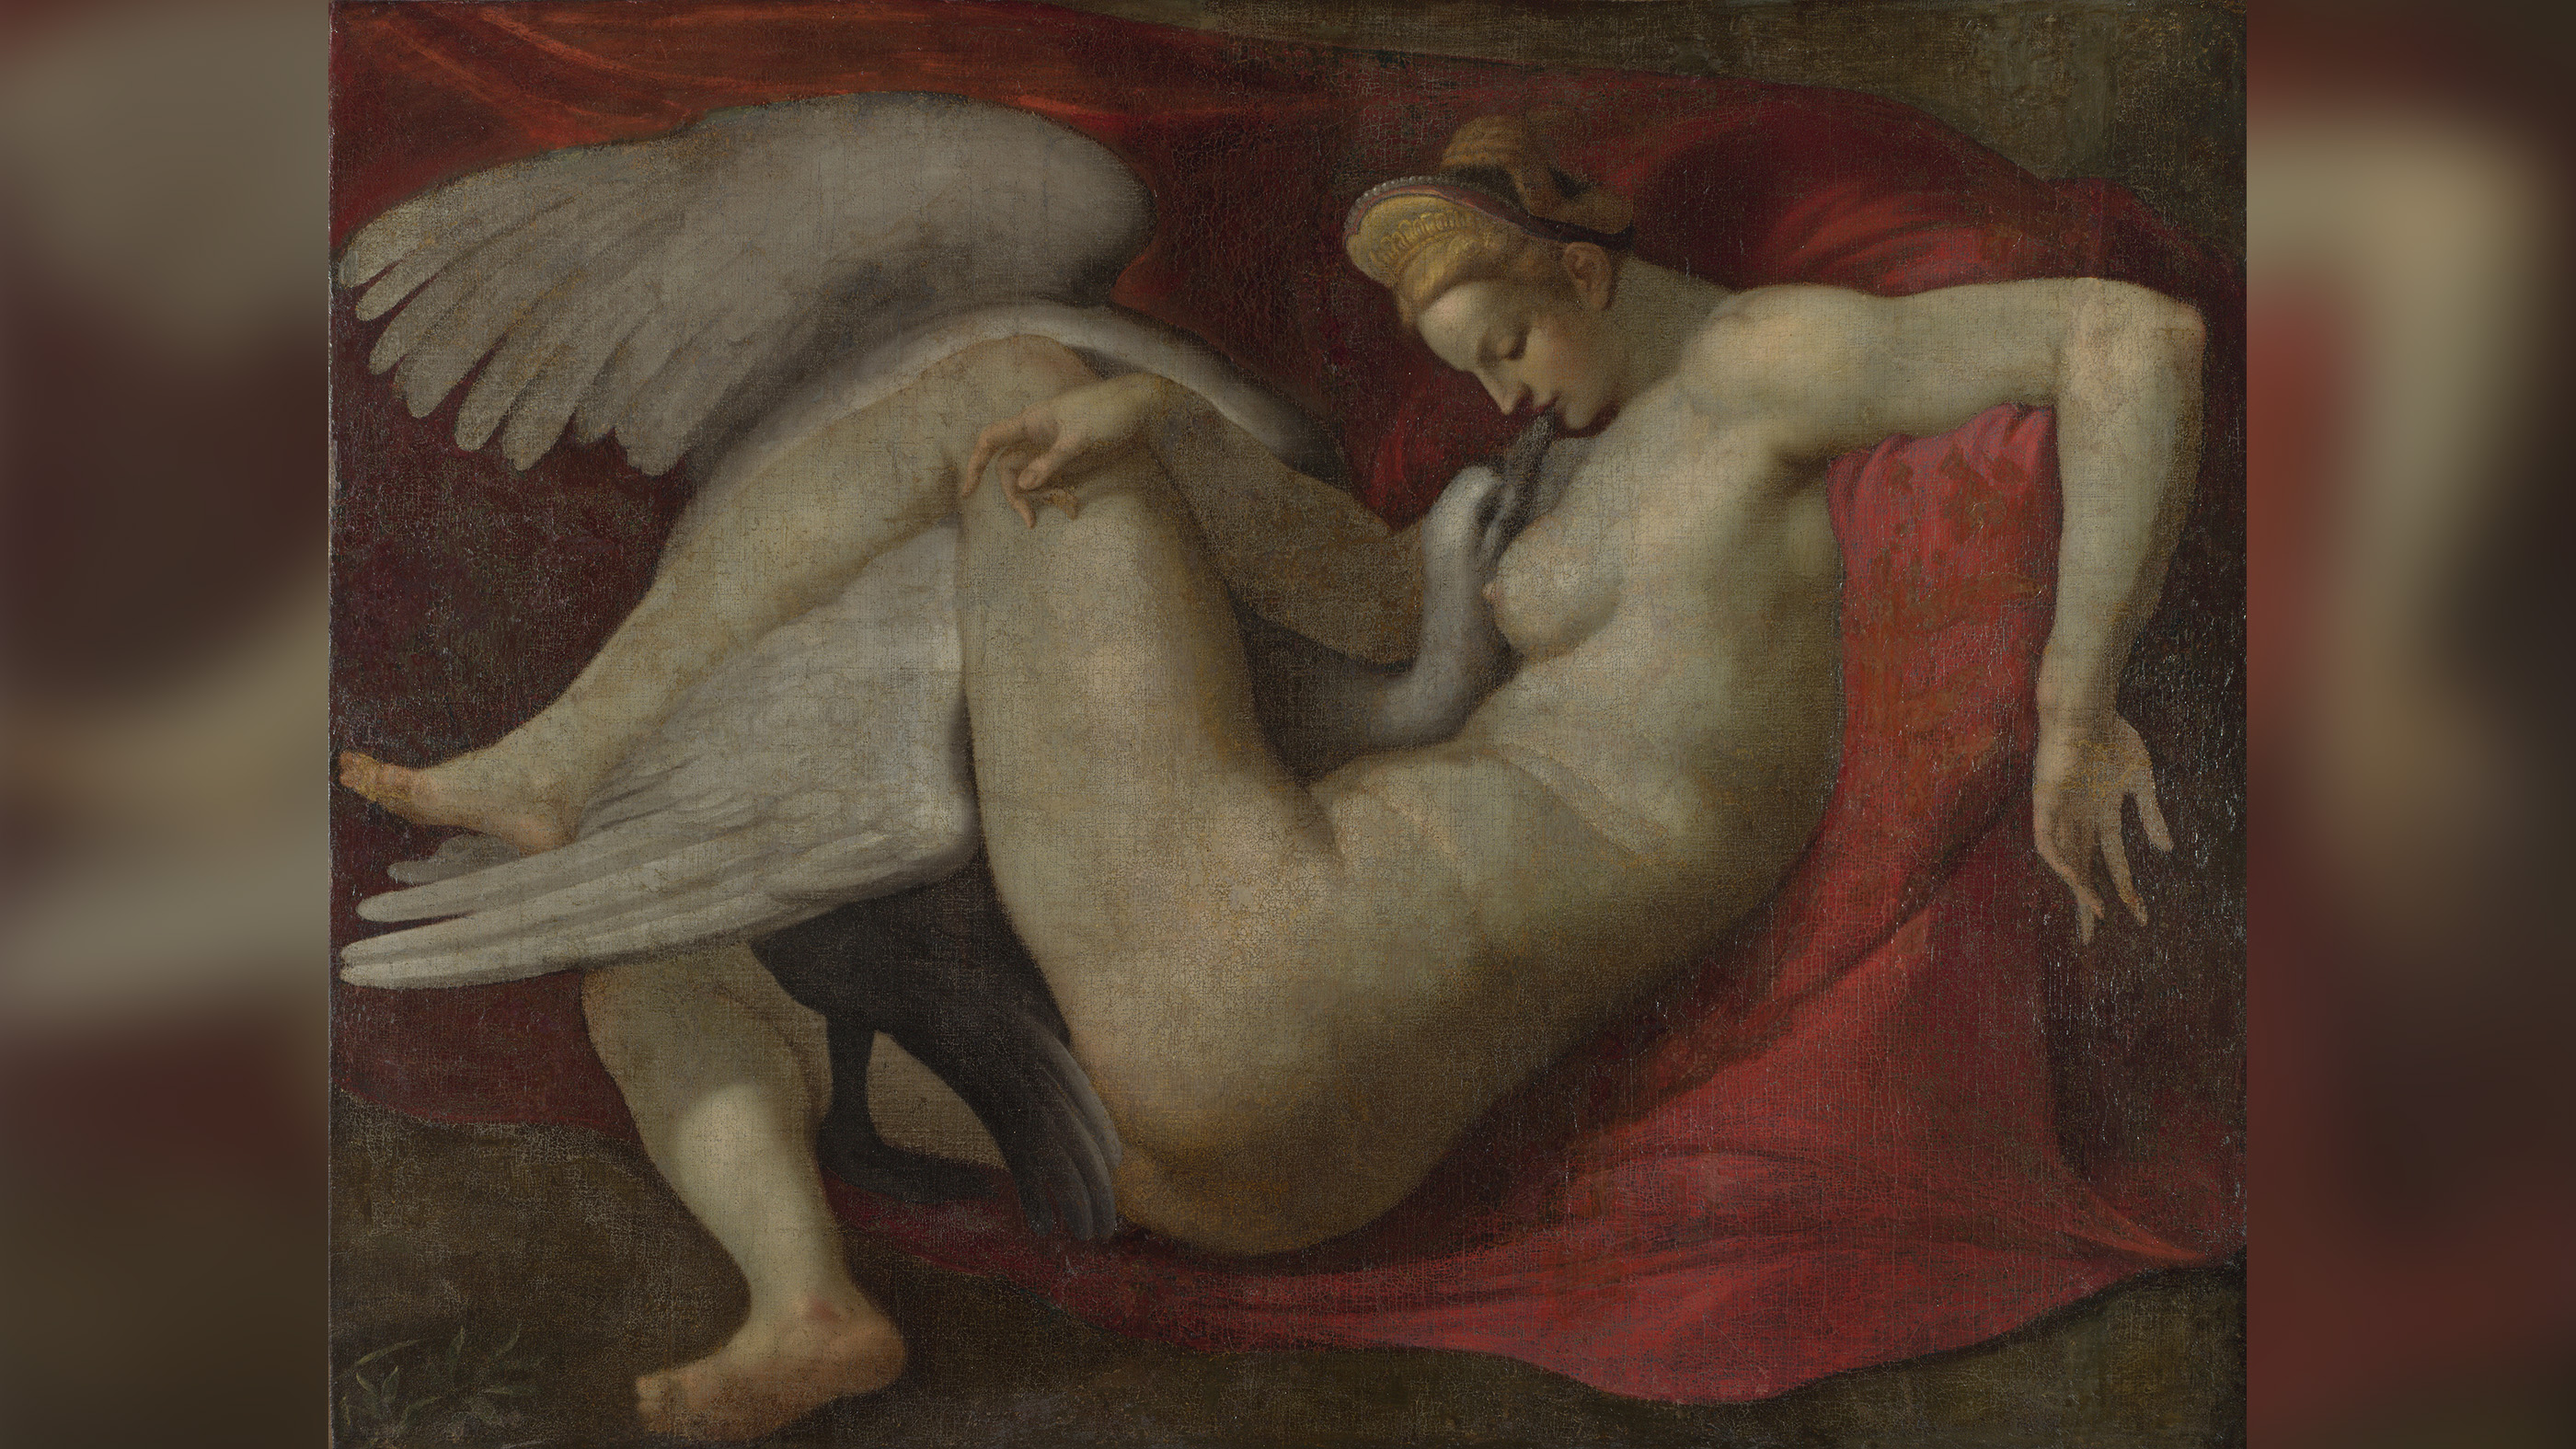 Leda and the Swan, after 1530, found in the collection of the National Gallery, London.